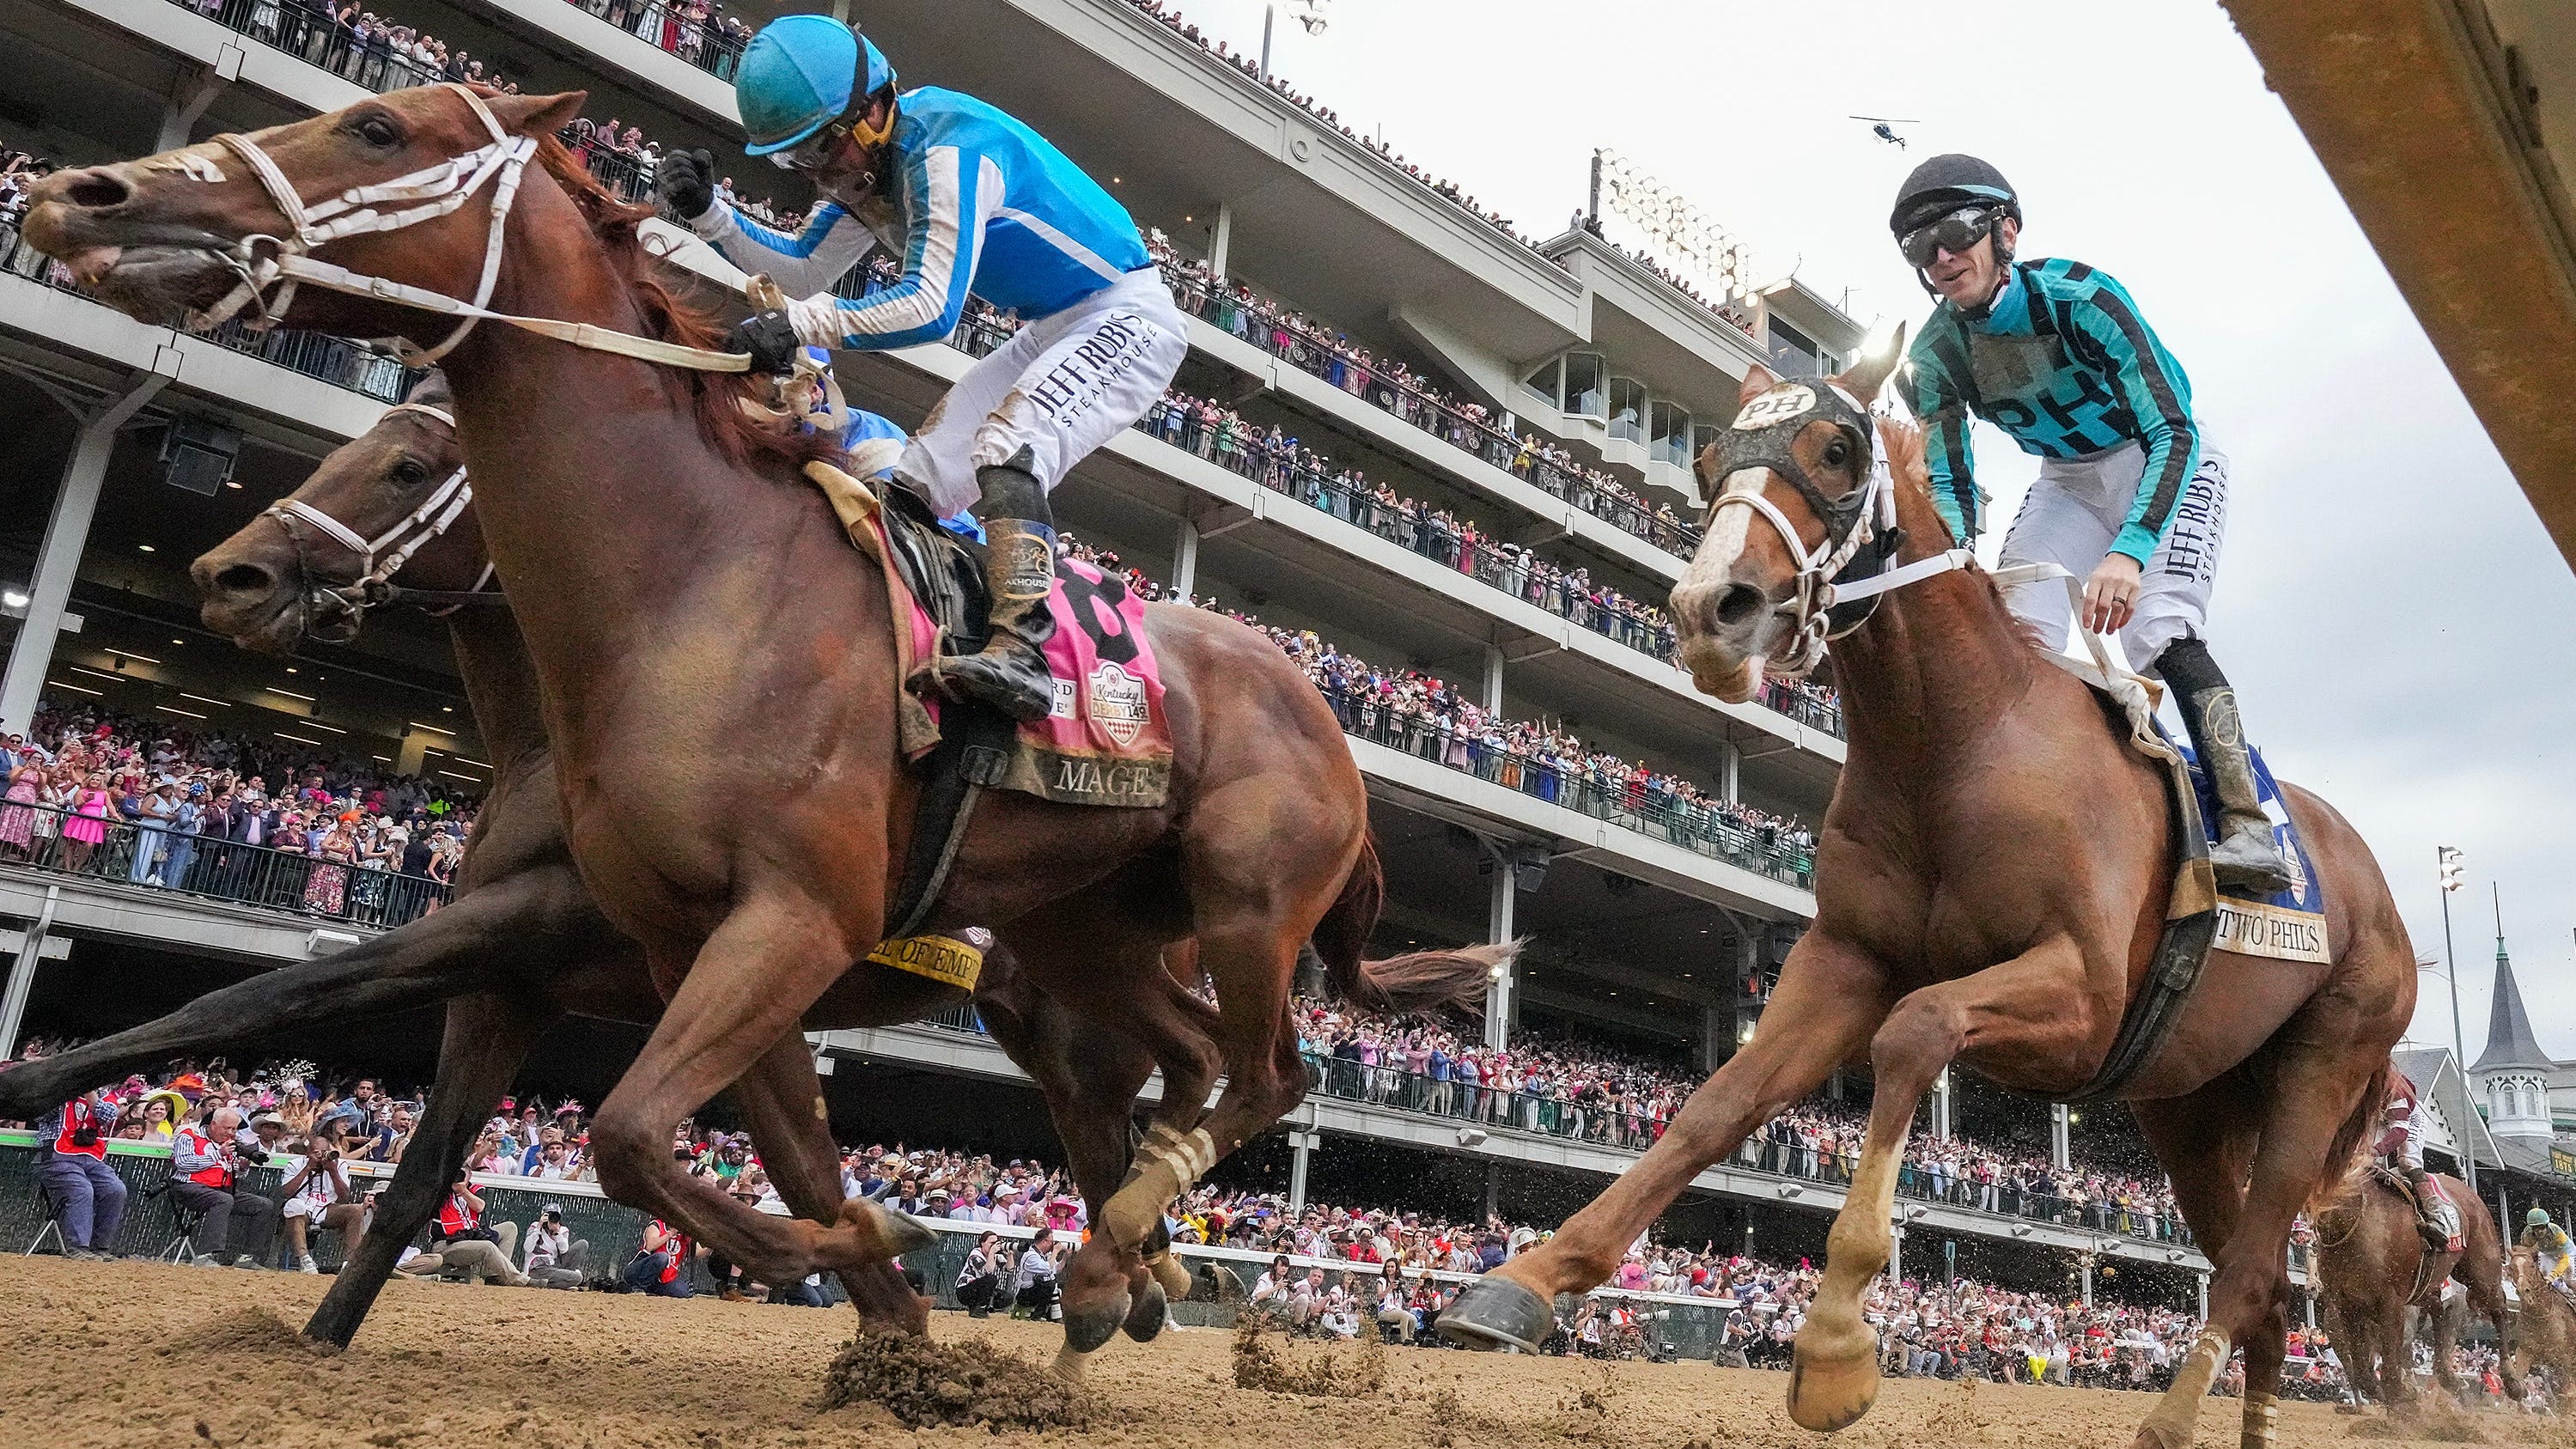 Mage and Castellano Triumph in Shocking Kentucky Derby Upset at Churchill Downs